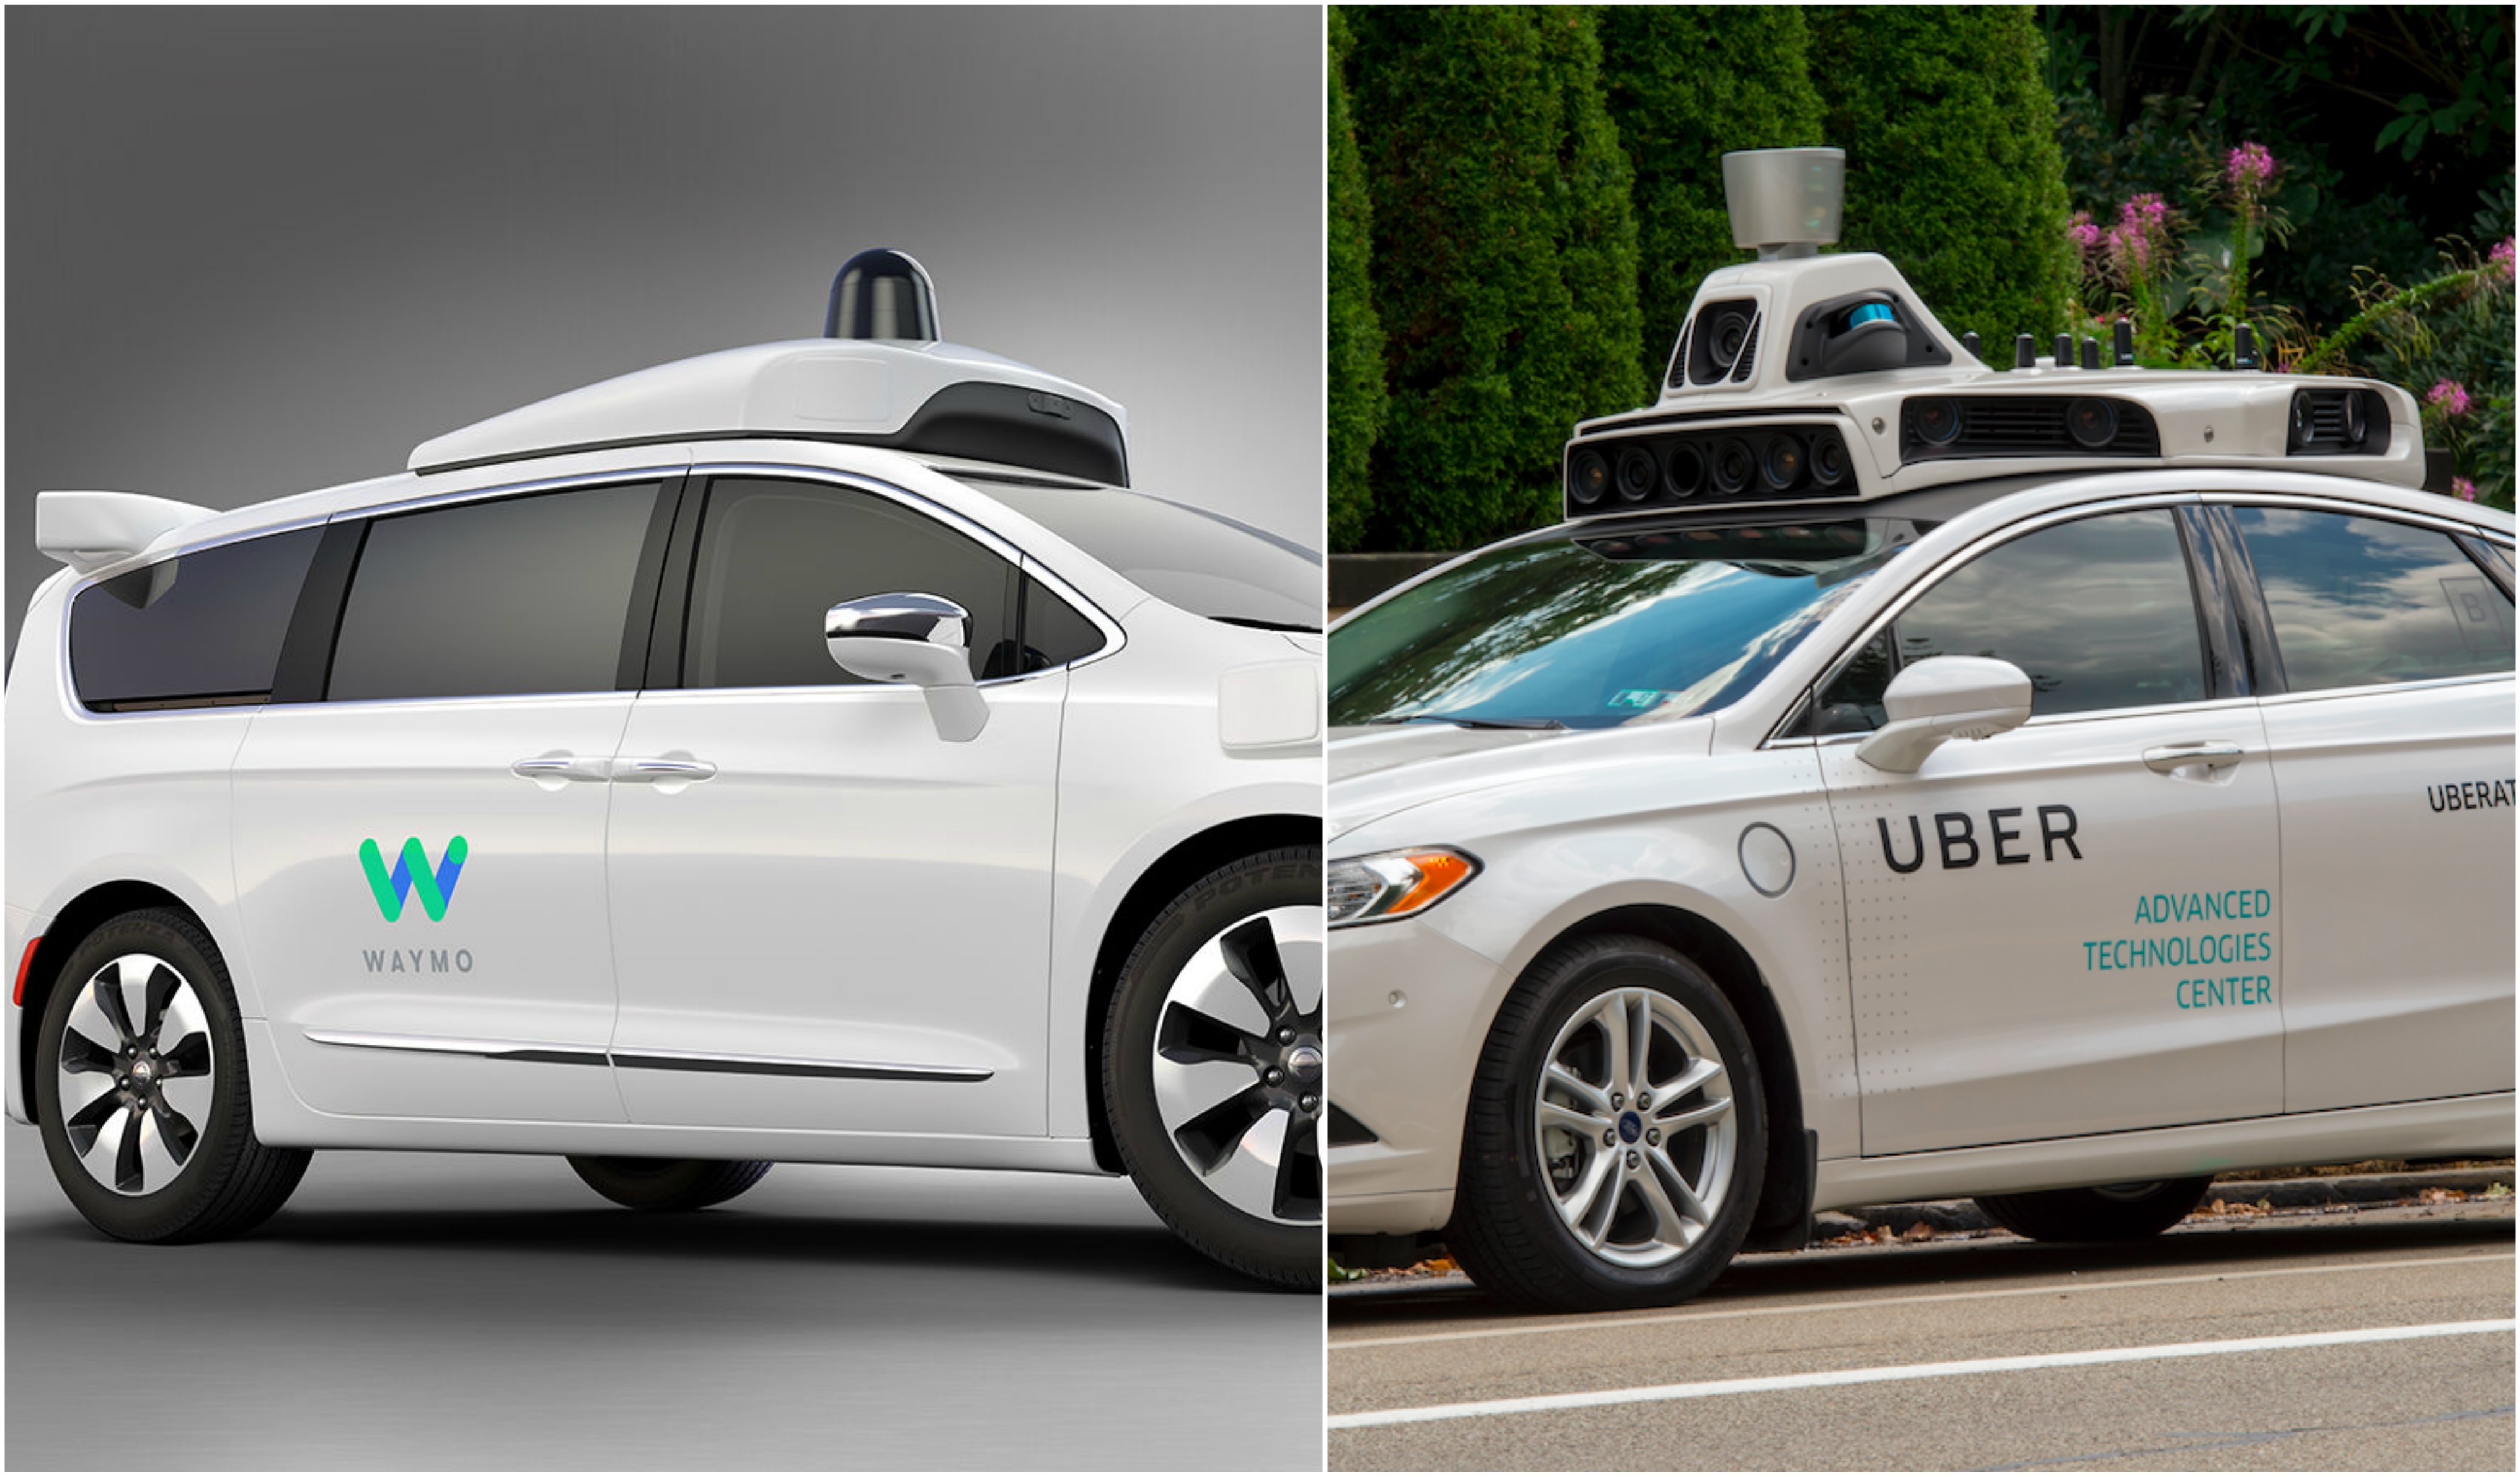 Two self-driving cars, one from Way and one from Uber